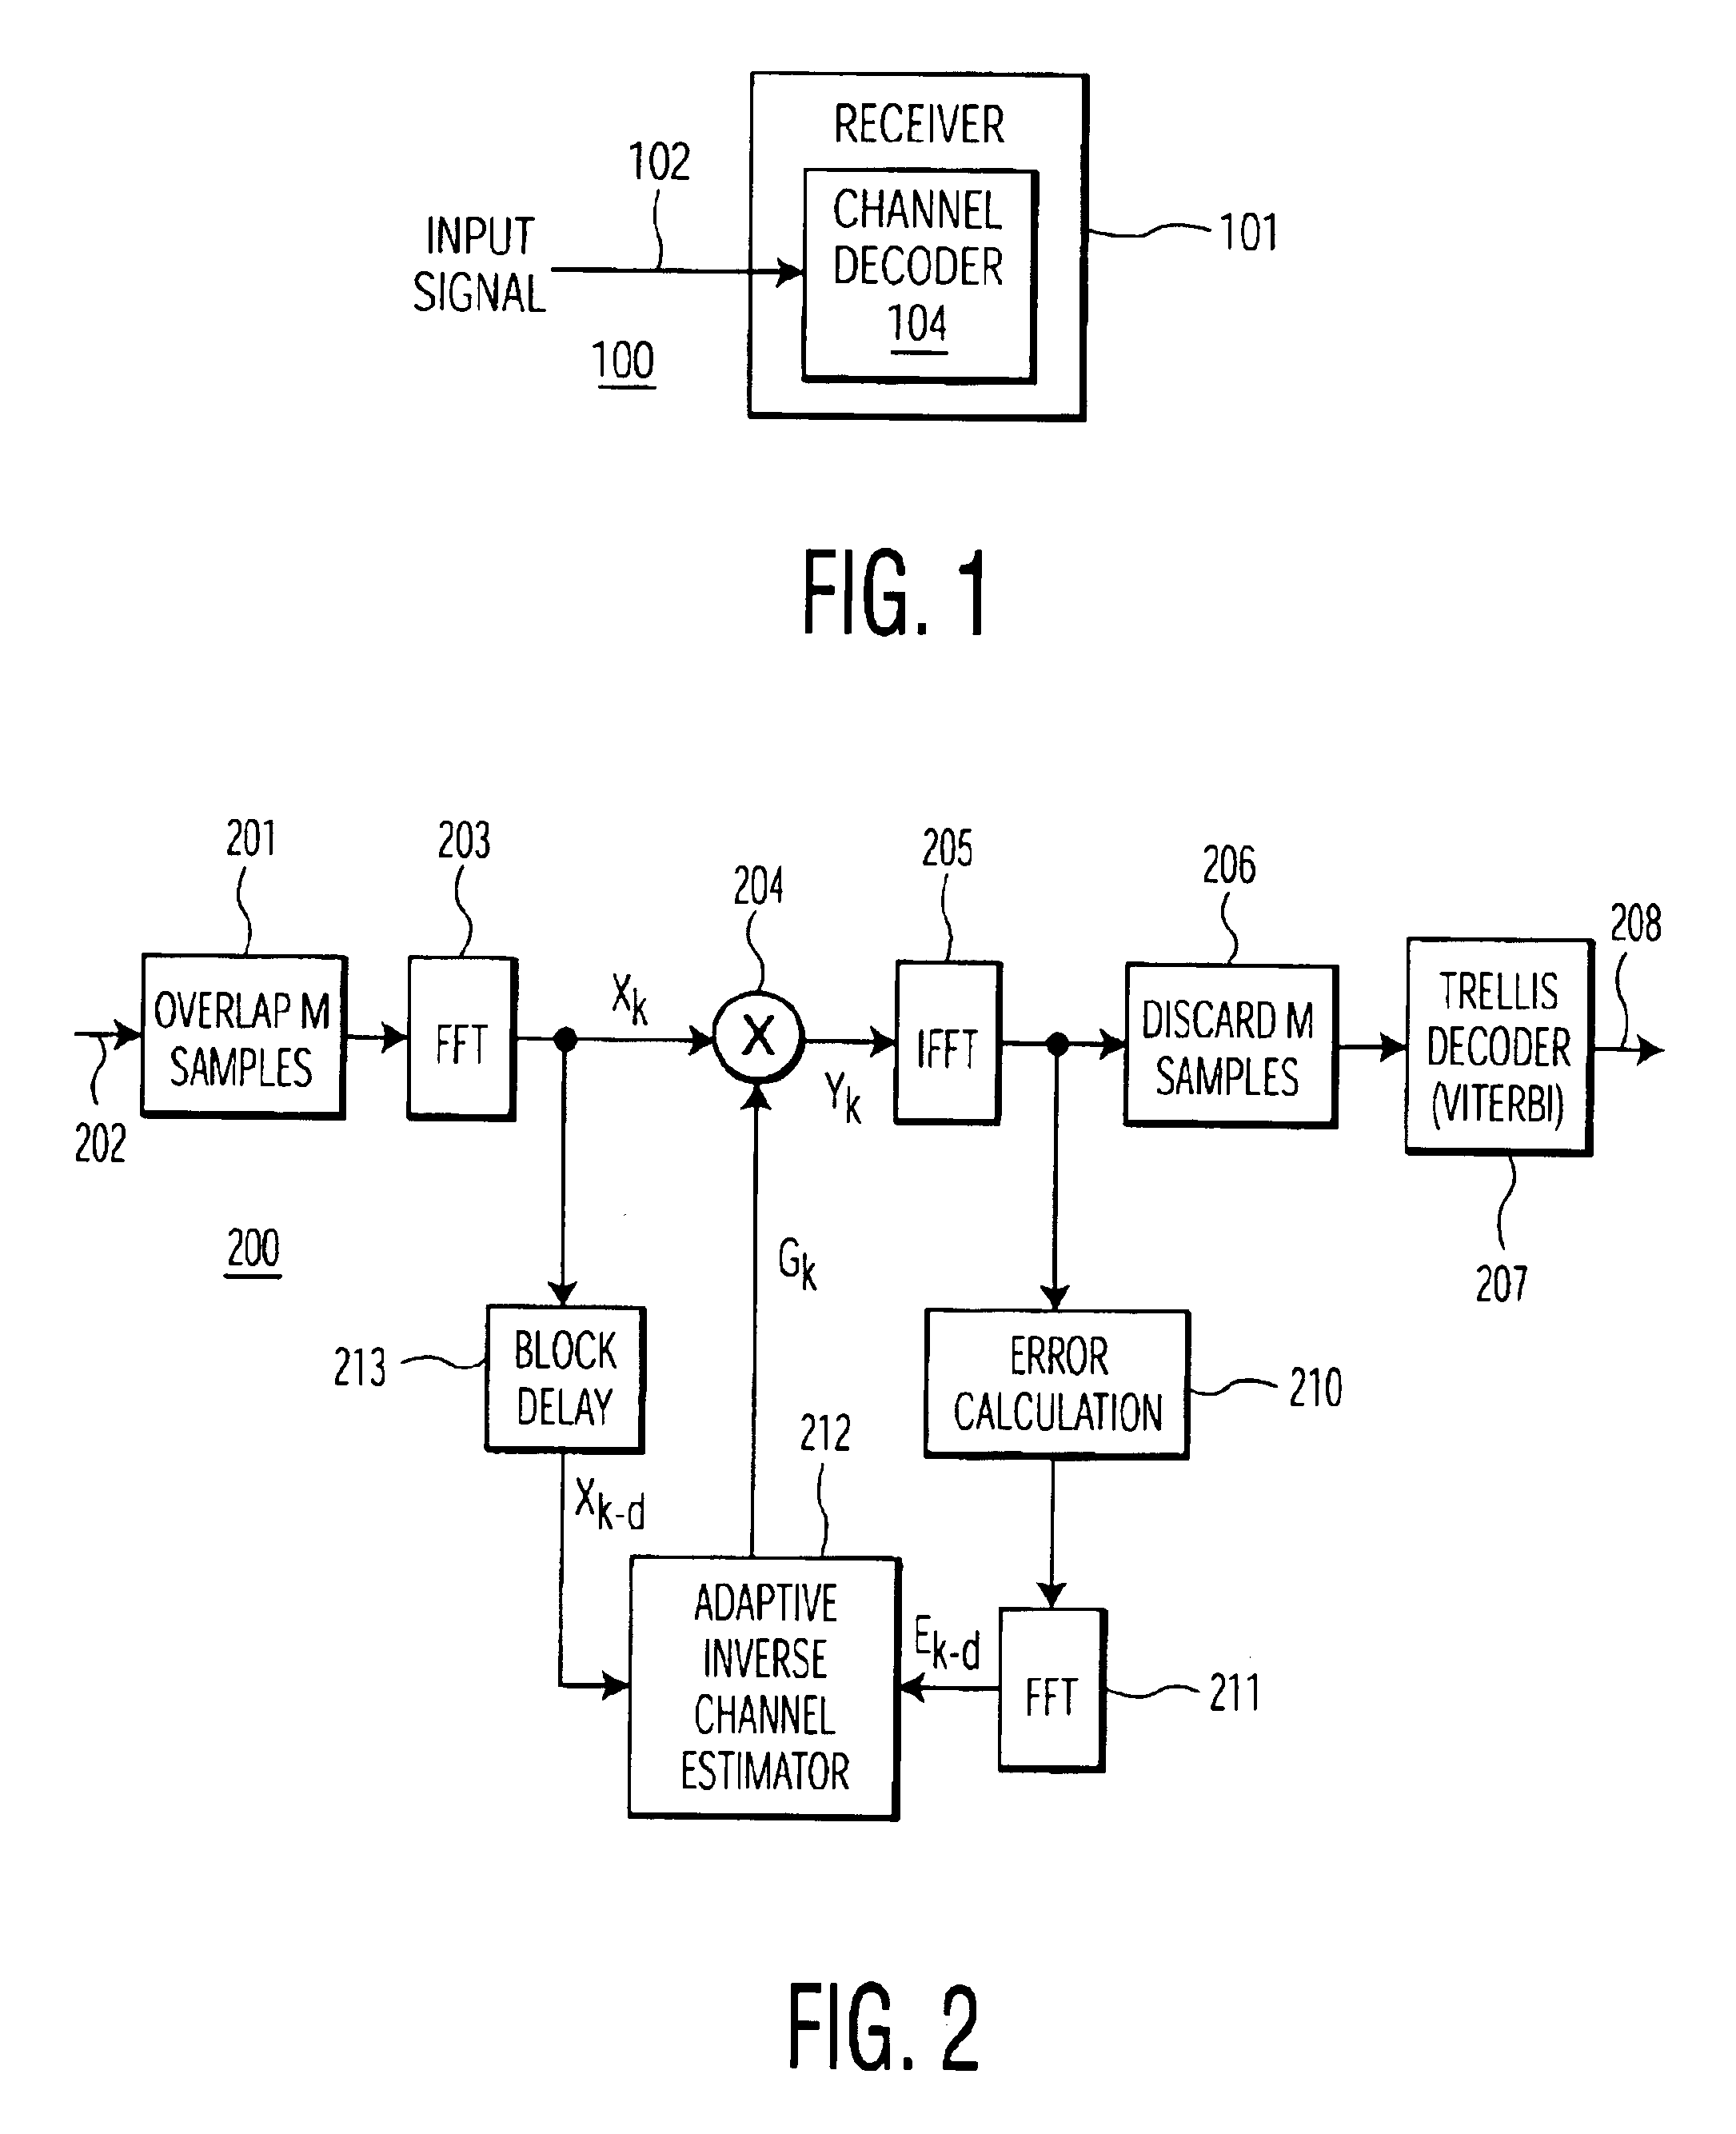 Frequency-domain equalizer for terrestrial digital TV reception